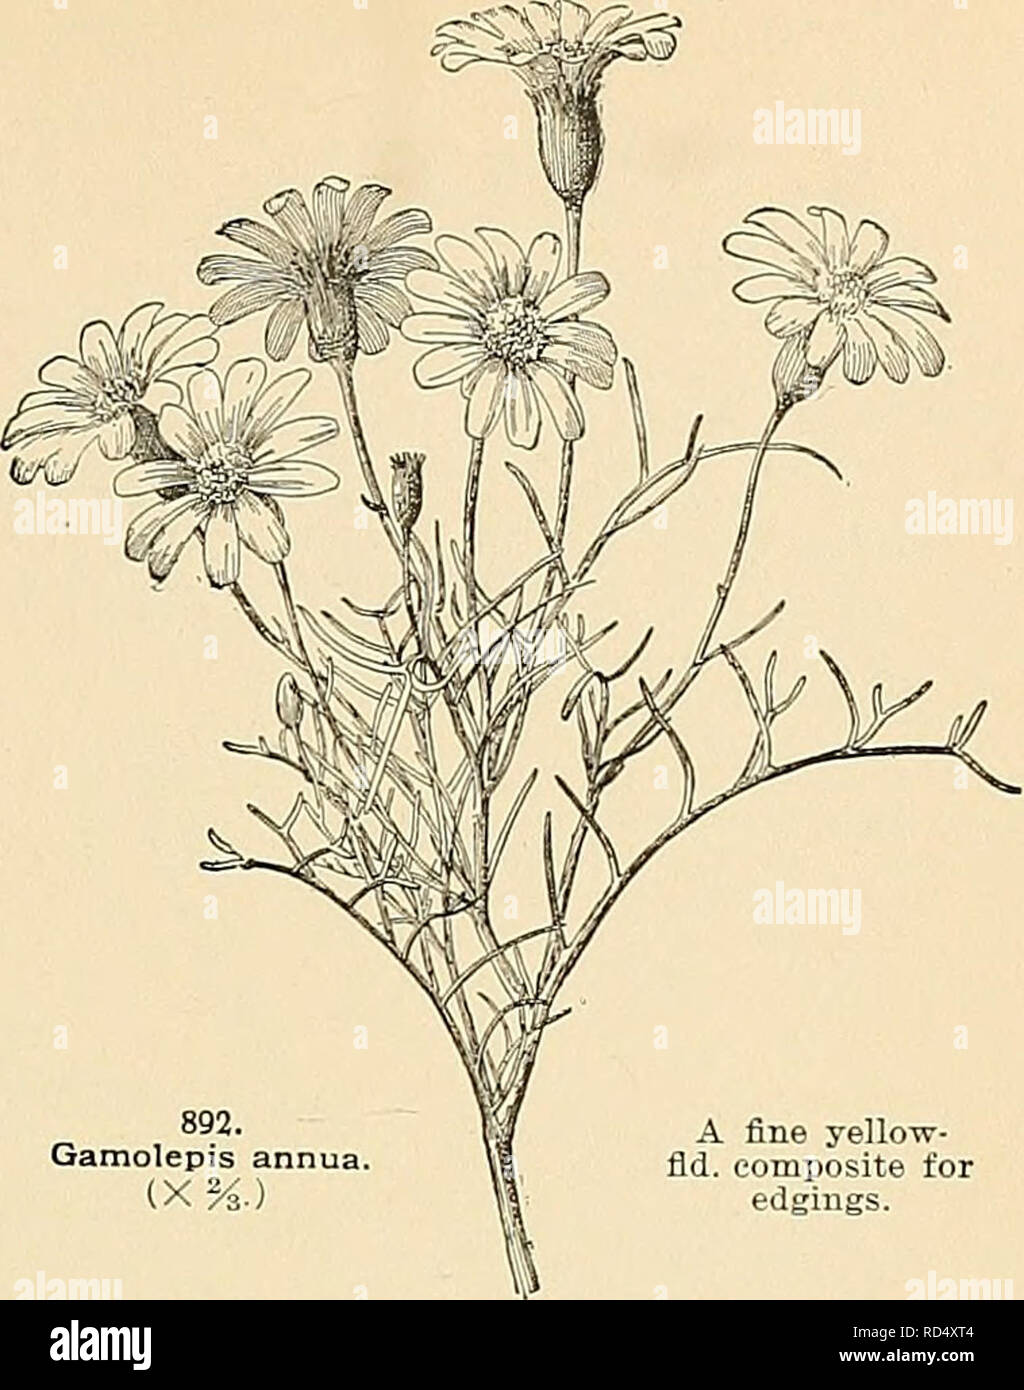 . Cyclopedia of American horticulture, comprising suggestions for cultivation of horticultural plants, descriptions of the species of fruits, vegetables, flowers, and ornamental plants sold in the United States and Canada, together with geographical and biographical sketches. Gardening. GALIUM are used to lighten the effect of bouquets of other fls., notably s%&quot;eet peas, &quot;which can hardly be arranged with their own foliage, and which in large masses are inclined to look heavy and lumpy. Gypsophilas, which are used for the same purpose, bloom later. They have an equal infinity of det Stock Photo